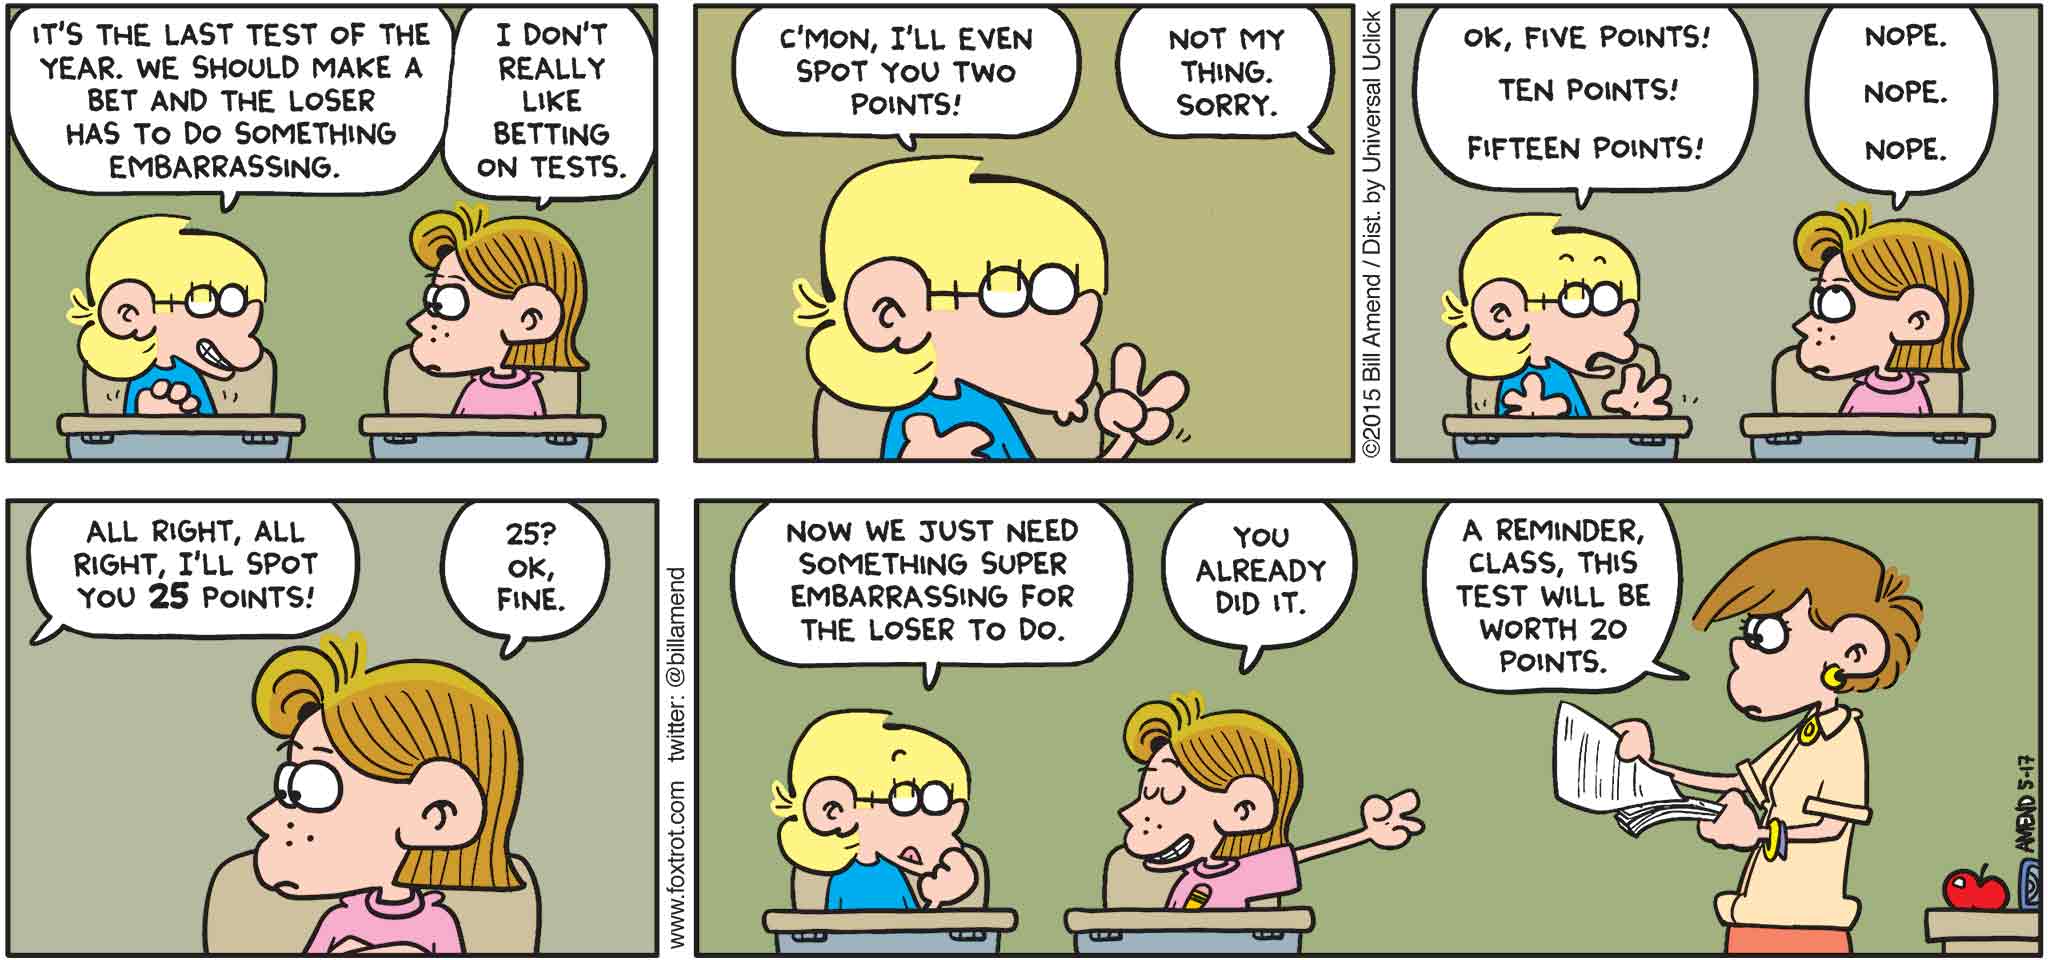 FoxTrot by Bill Amend - "Pointless" published May 17, 2015 - Jason: It's the last test of the year. We should make a best and the loser has to do something embarrassing. Eileen: I don't really like betting on tests. Jason: C'mon, I'll even spot you two points. Eileen: Not my thing. Sorry. Jason: Ok, five points! Ten points! Fifteen points! Eileen: Nope. Nope. Nope. Jason: All right, all right, I'll spot you 25 points! Eileen: 25? Ok, fine. Jason: Now we just need something super embarrassing for the loser to do. Eileen: You already did it. Teacher: A reminder, class, this test will be worth 20 points.